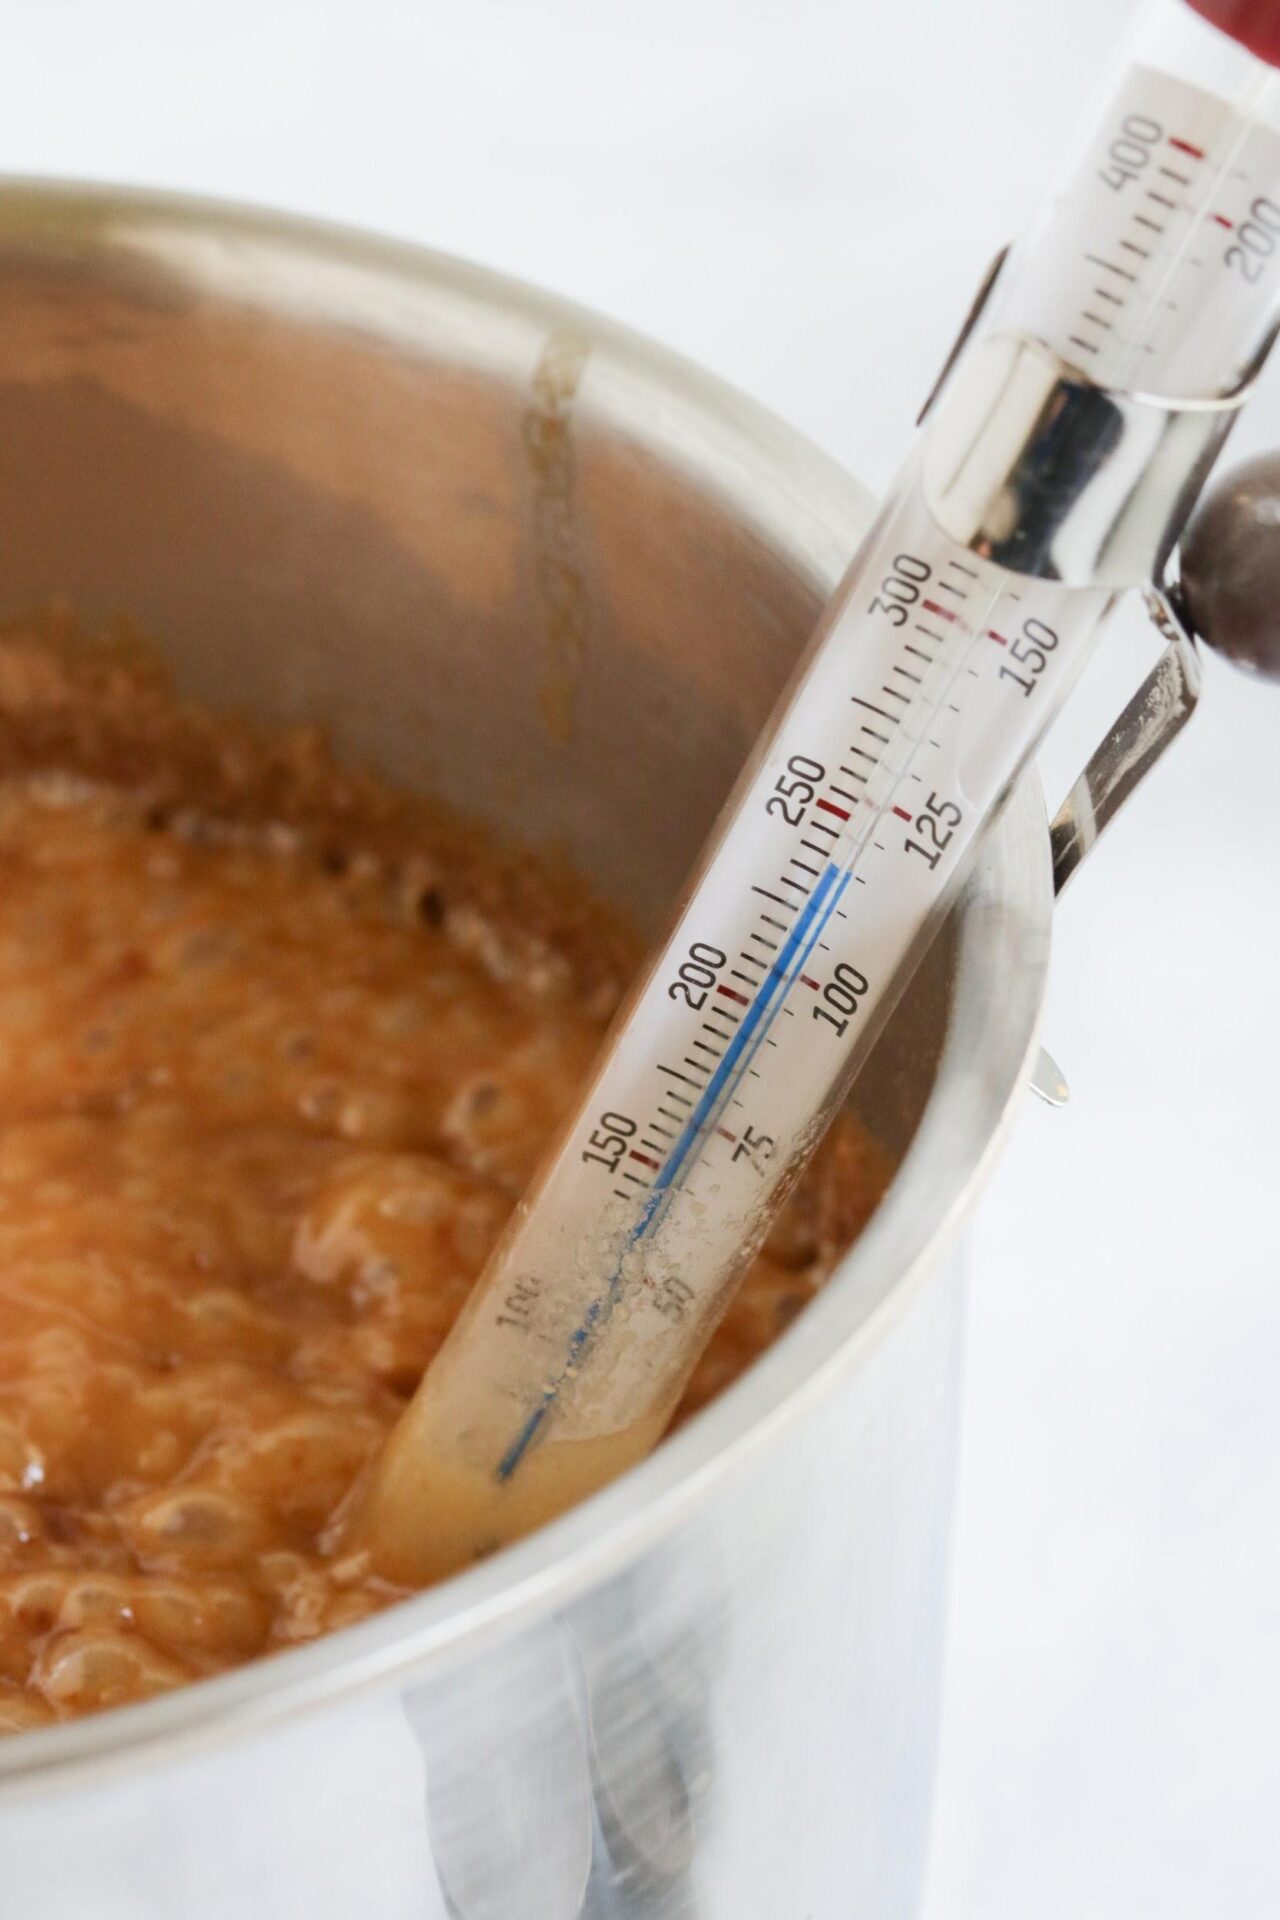 candy thermometer in caramel